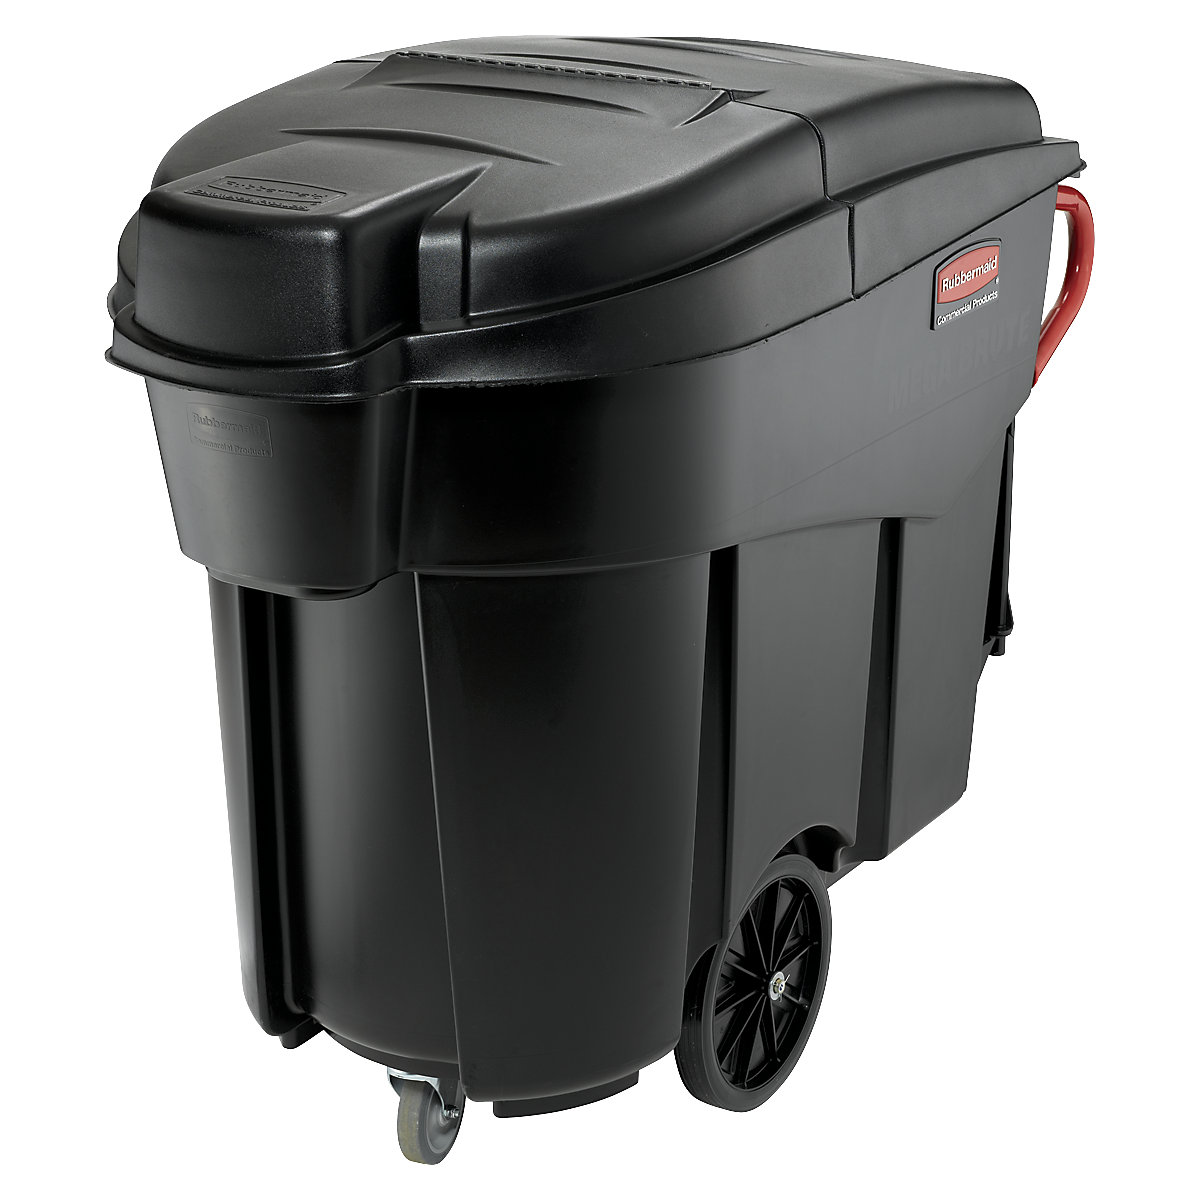 Rubbermaid – Mega BRUTE® lid for mobile waste collector